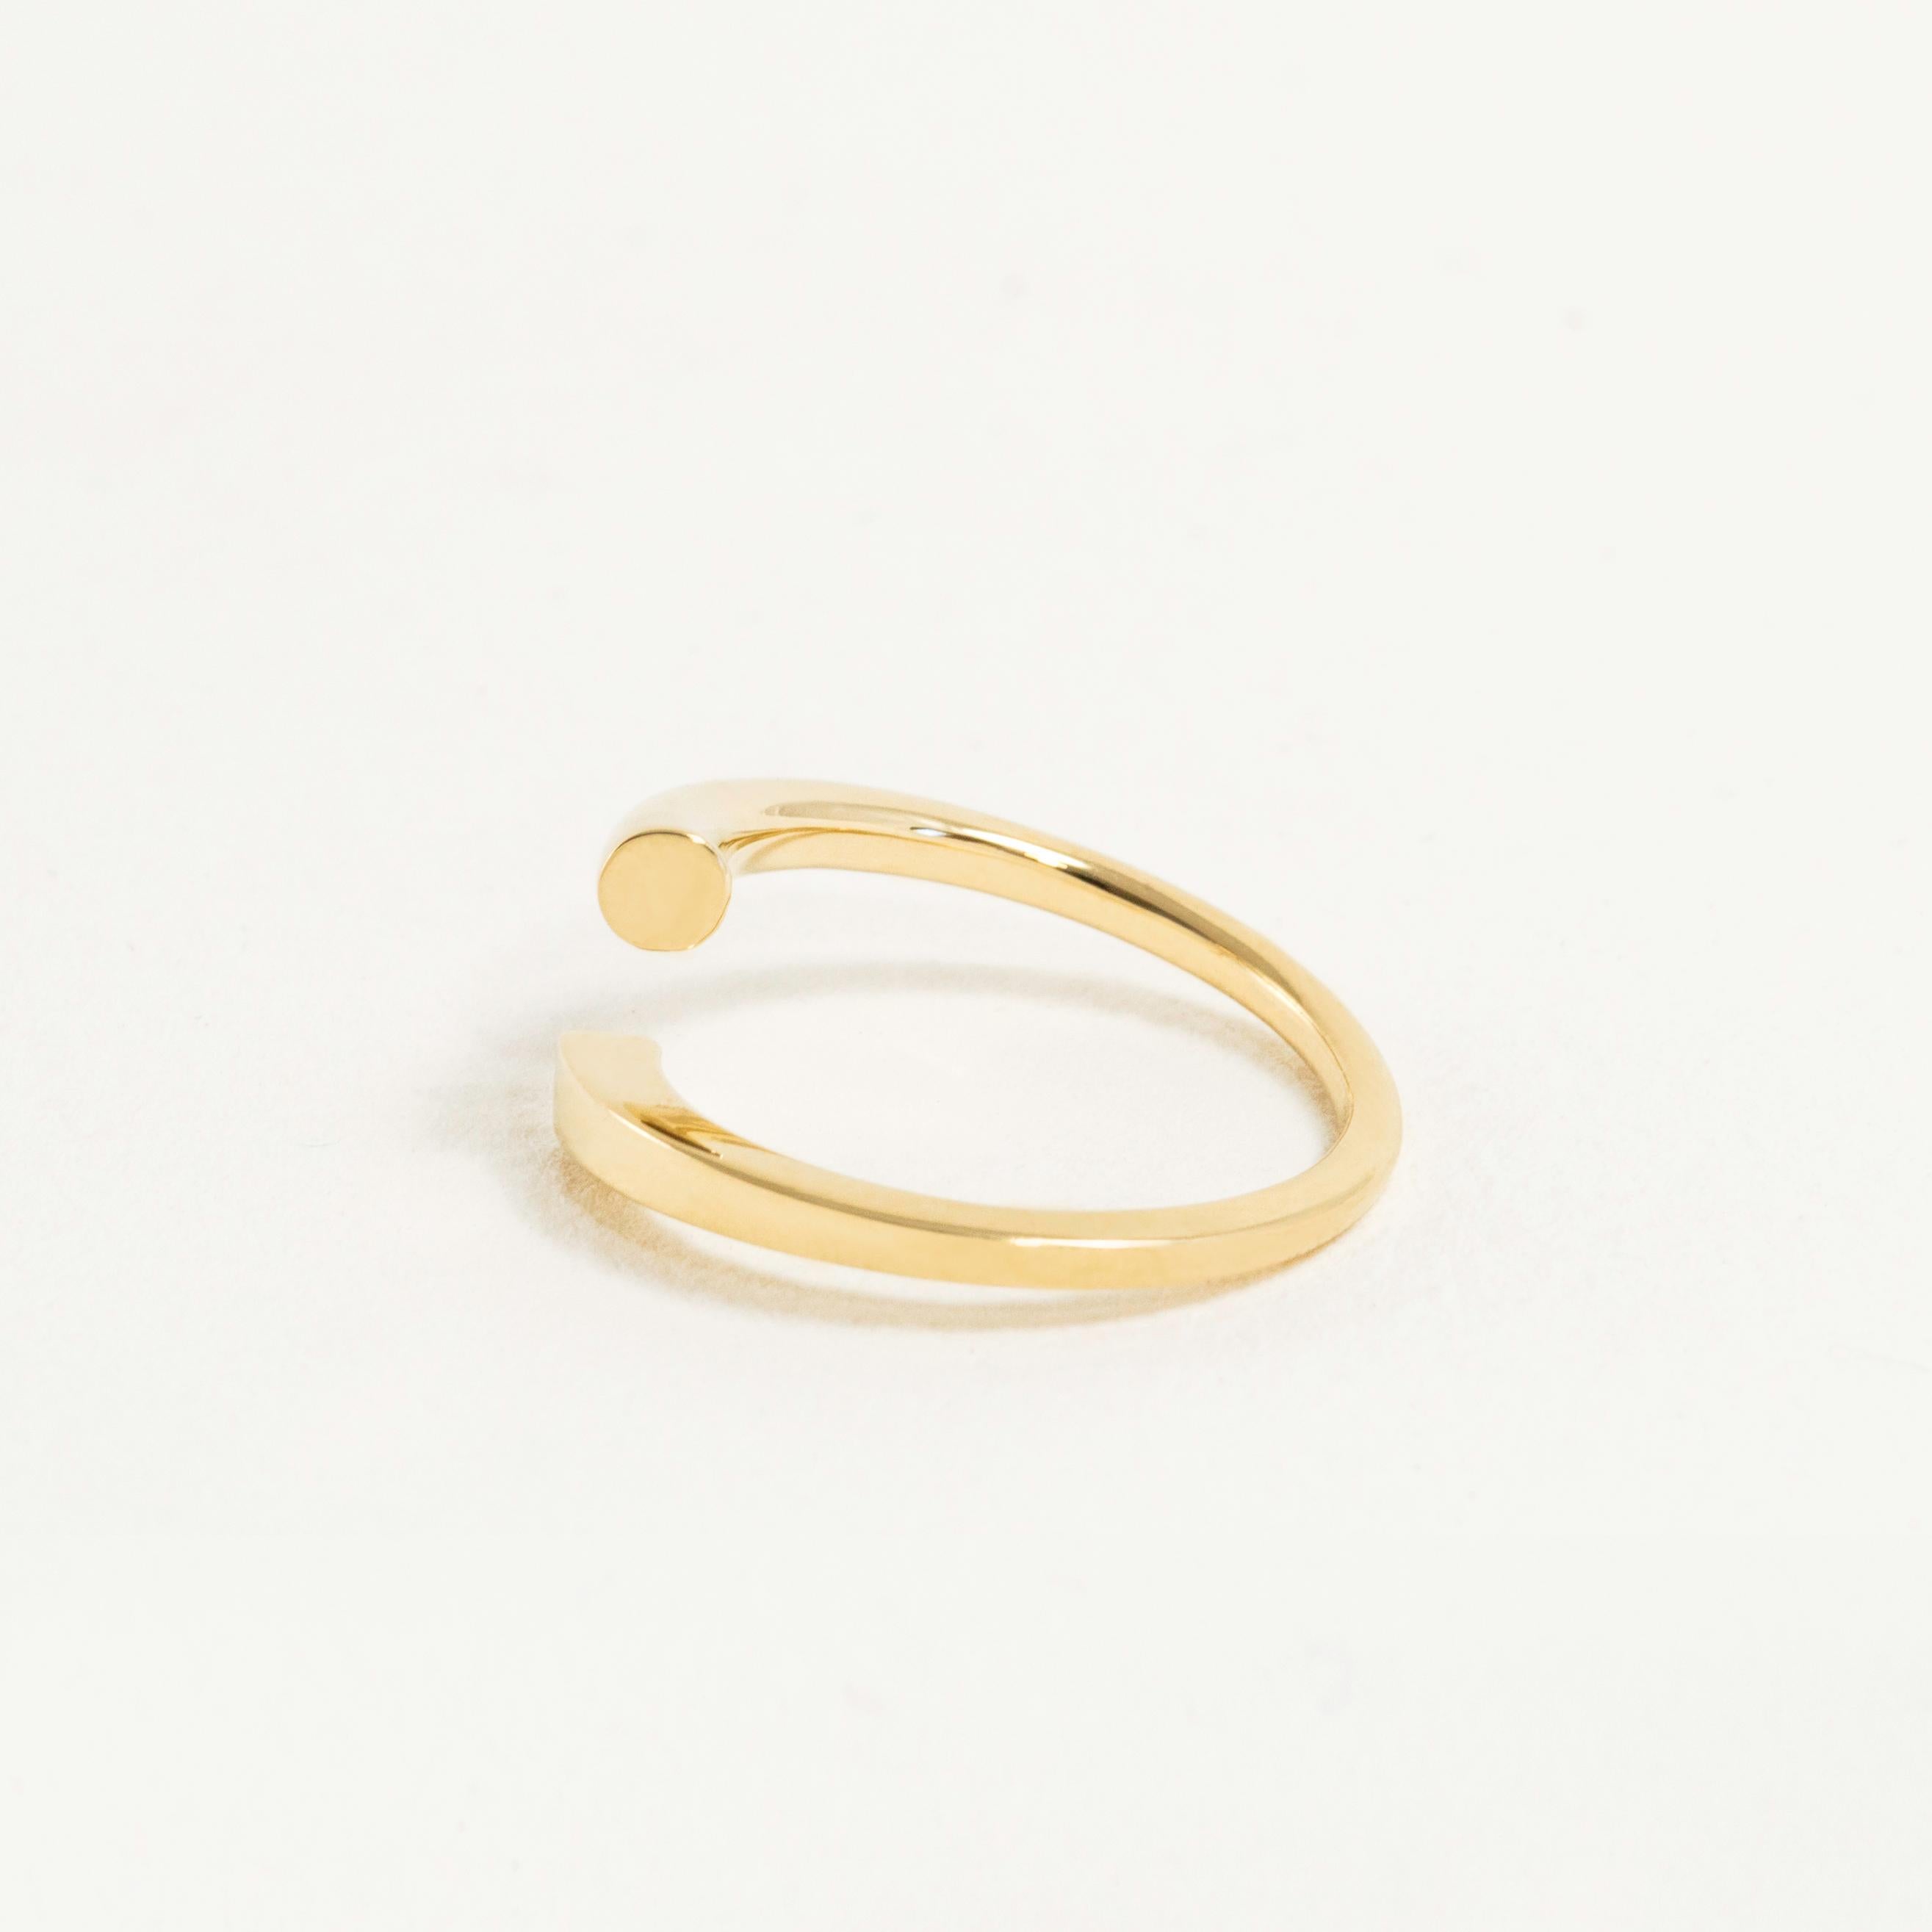 The Flow Ring gently transforms from a square to a circle as it wraps around the finger. Its tilting asymmetry and open-ended form evoke the idea of radical change—where we begin does not define where we can go. Crafted in solid 14k gold, the Flow